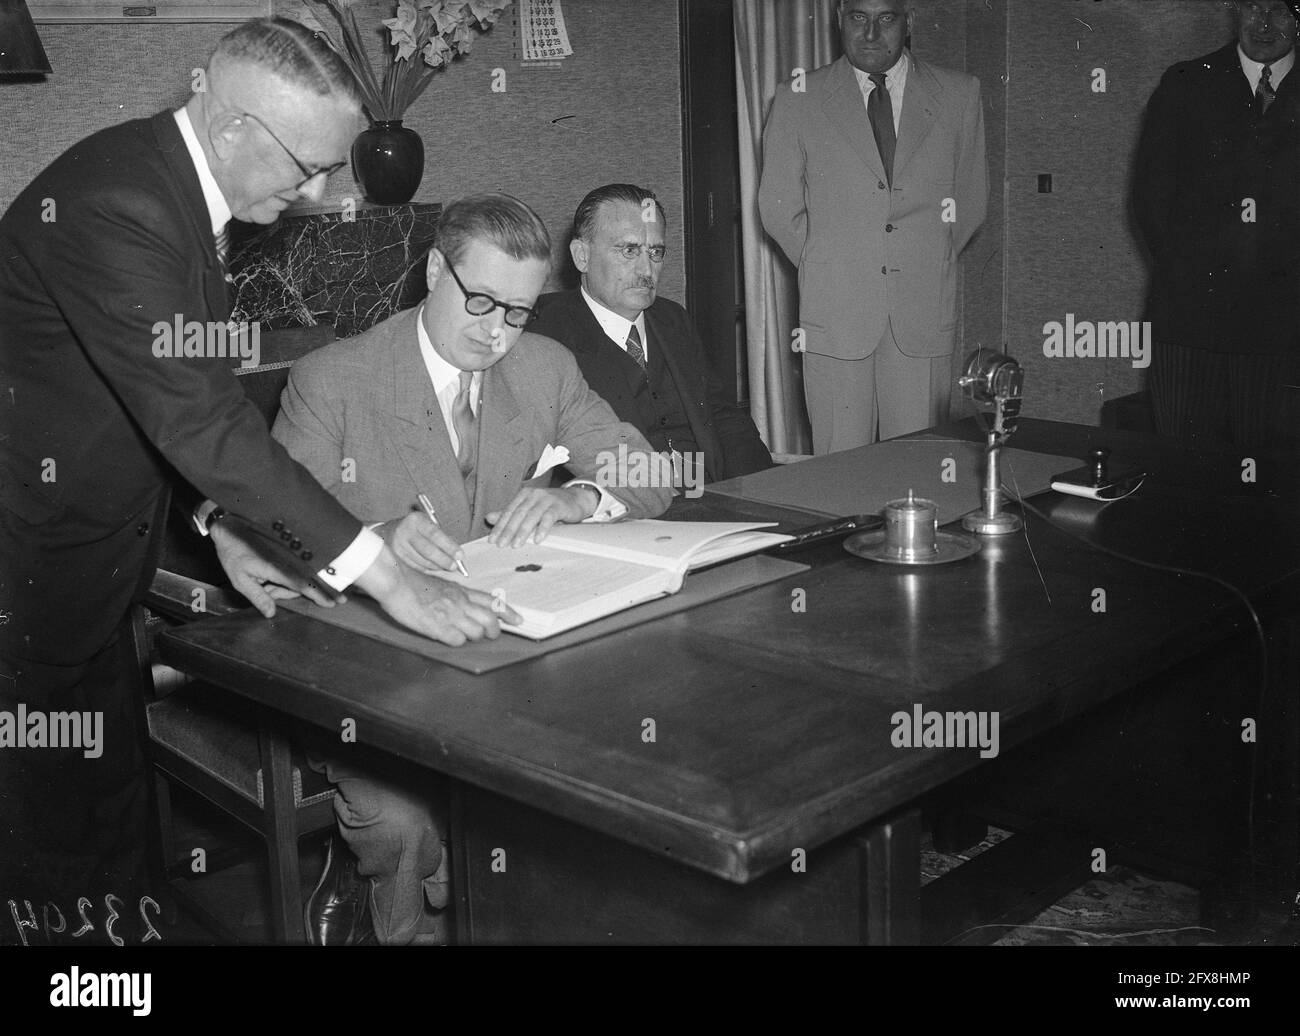 Belgian minister L.E. Troclet signs Treaty Mutuality Social Insurance between Belgium and the Netherlands. To his right Minister of Social Affairs W. Drees, August 29, 1947, international agreements, ministers, The Netherlands, 20th century press agency photo, news to remember, documentary, historic photography 1945-1990, visual stories, human history of the Twentieth Century, capturing moments in time Stock Photo